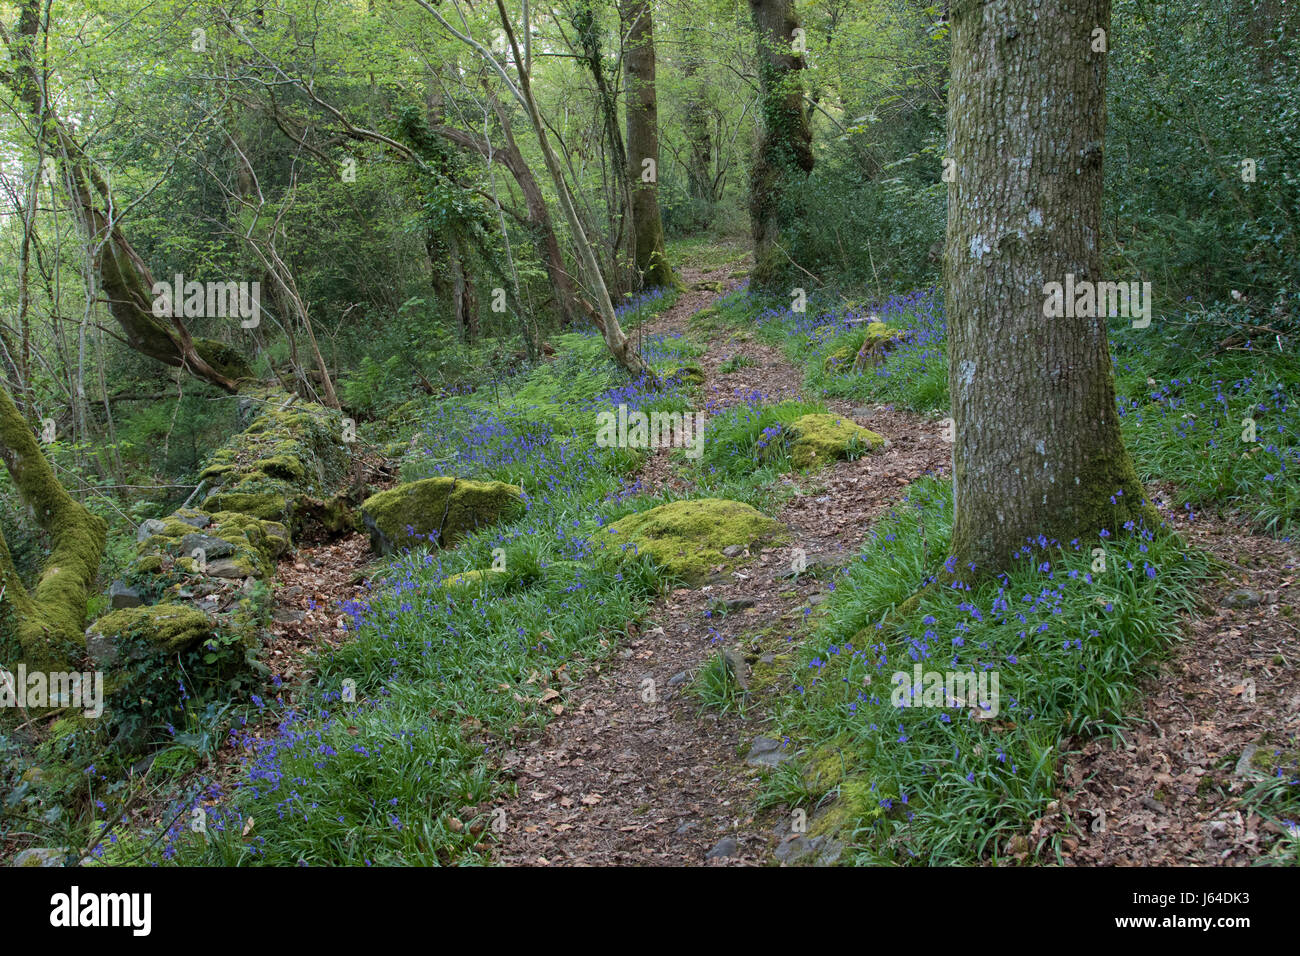 Bluebells carpeting the floor of an oak woodland in Snowdonia National Park, Wales Stock Photo